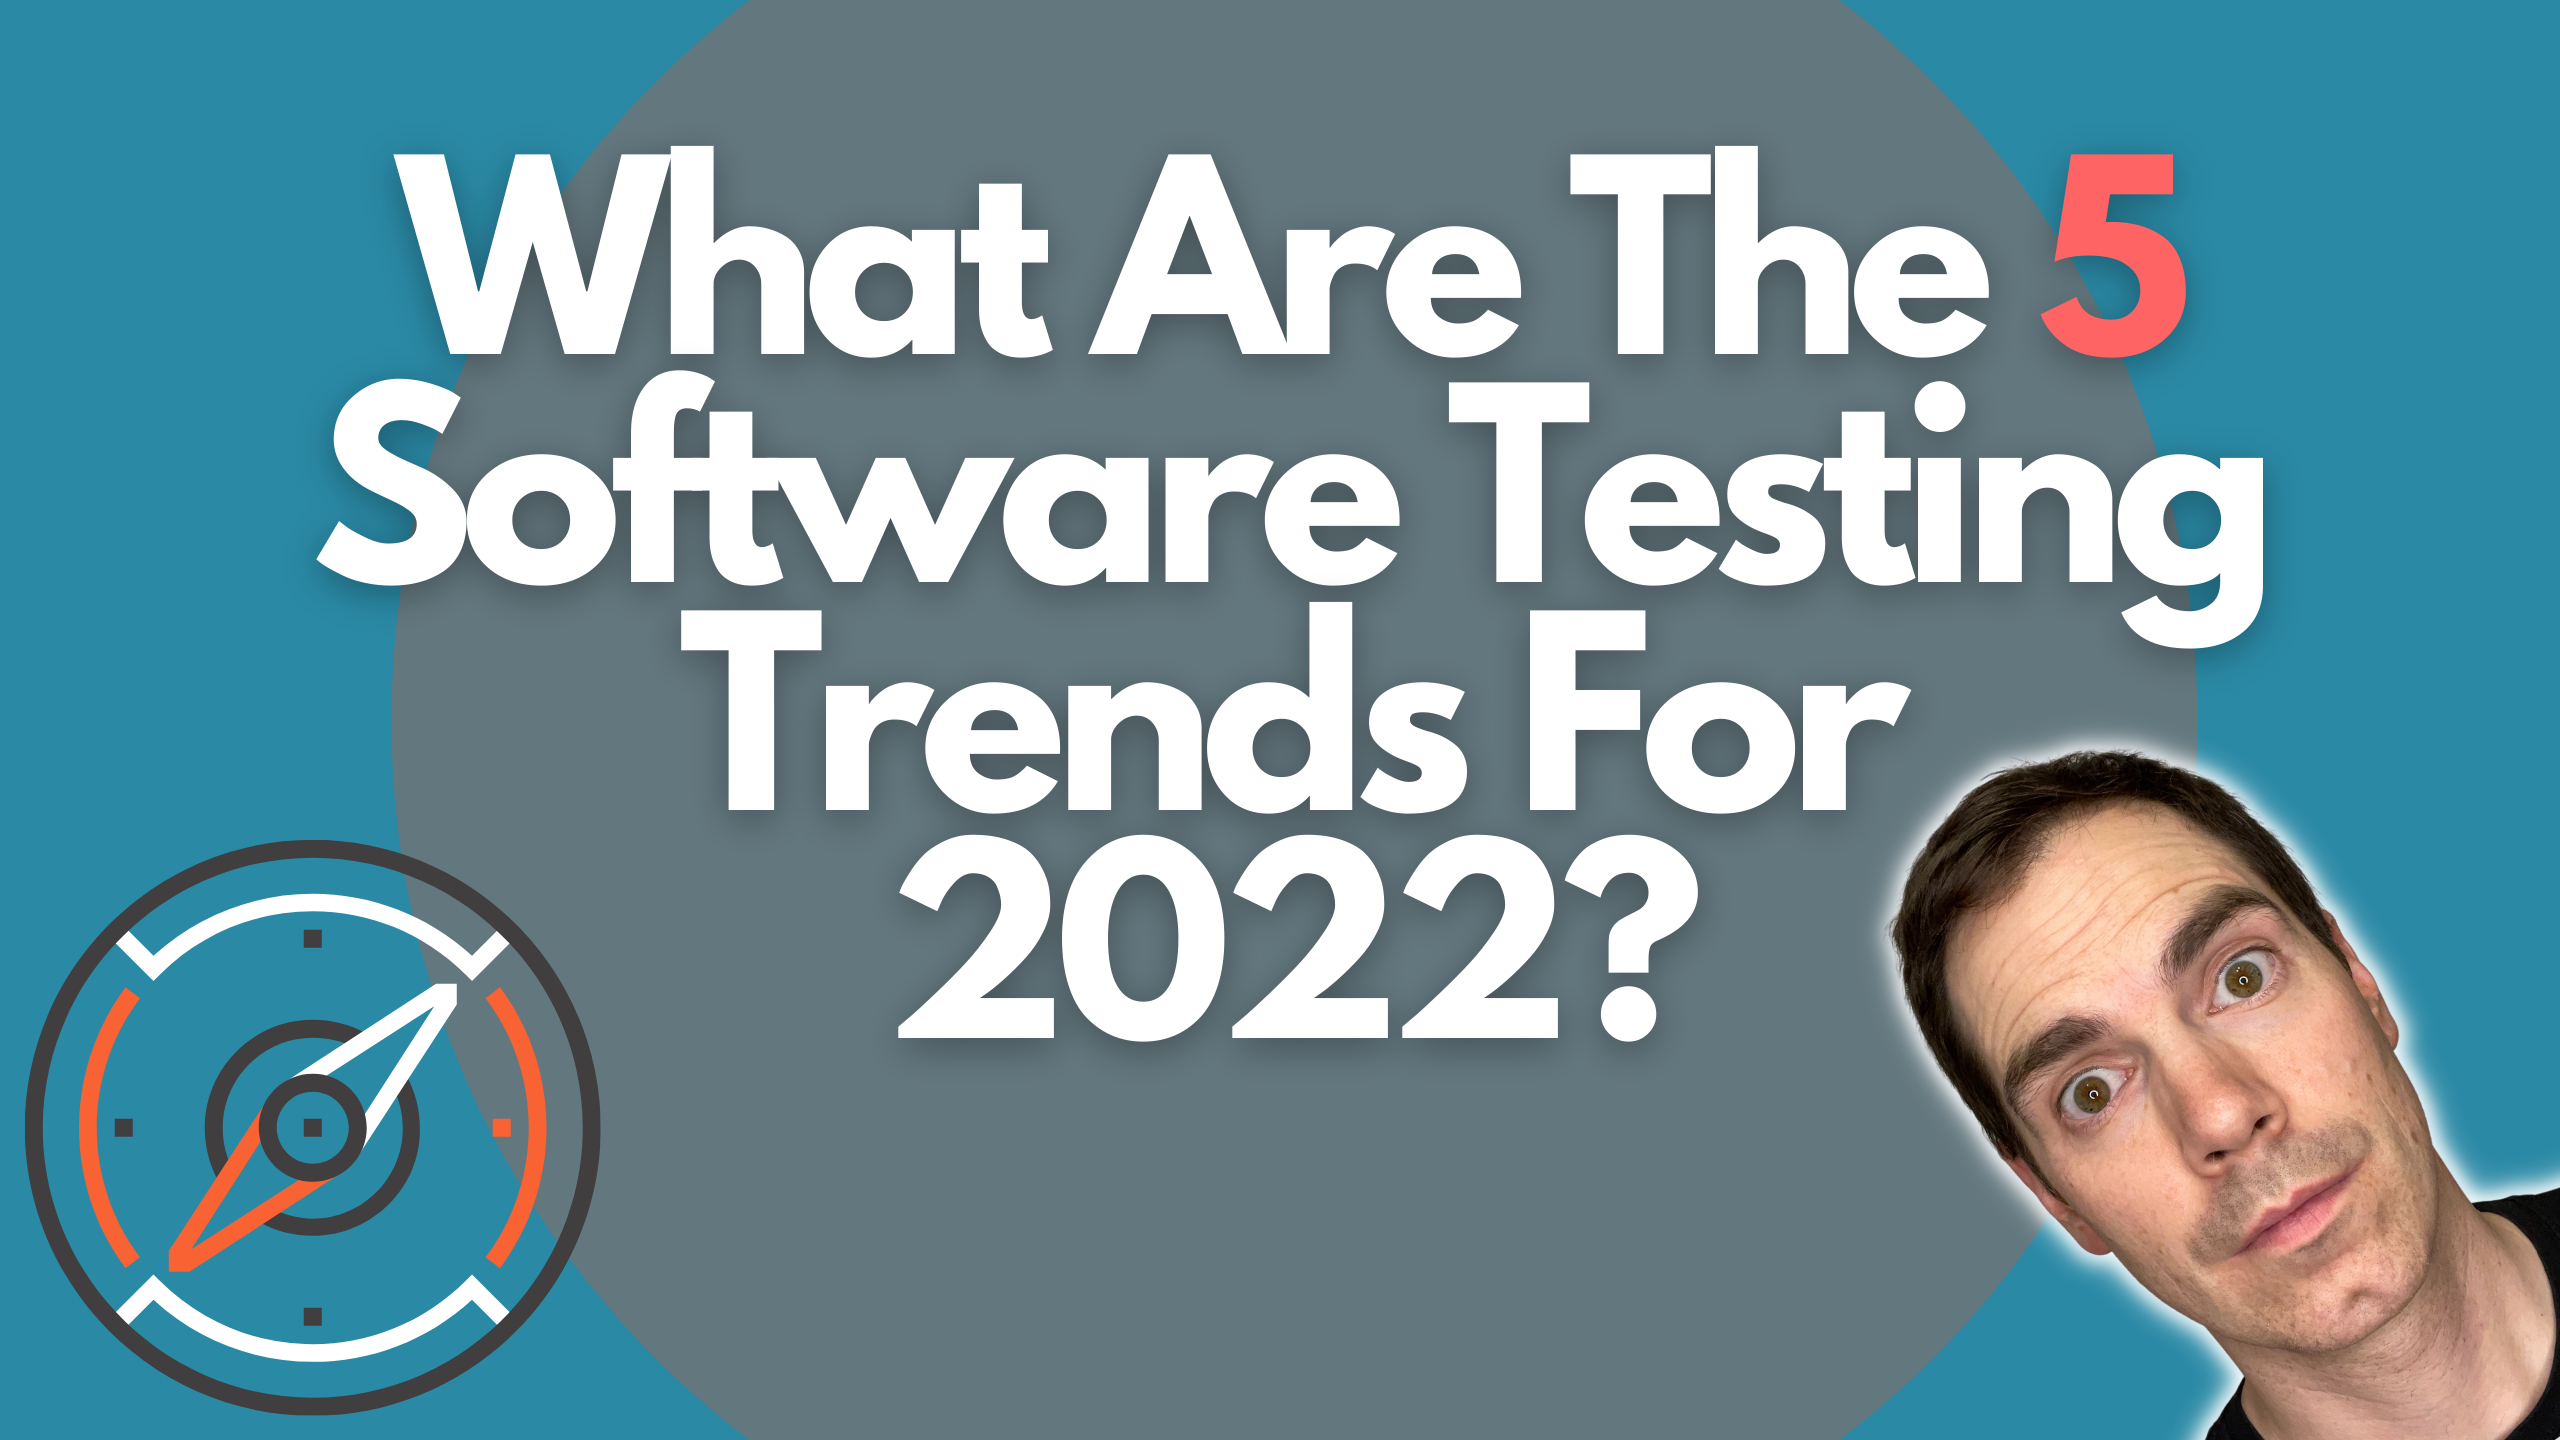 What Are the 5 Software Testing Trends for 2022